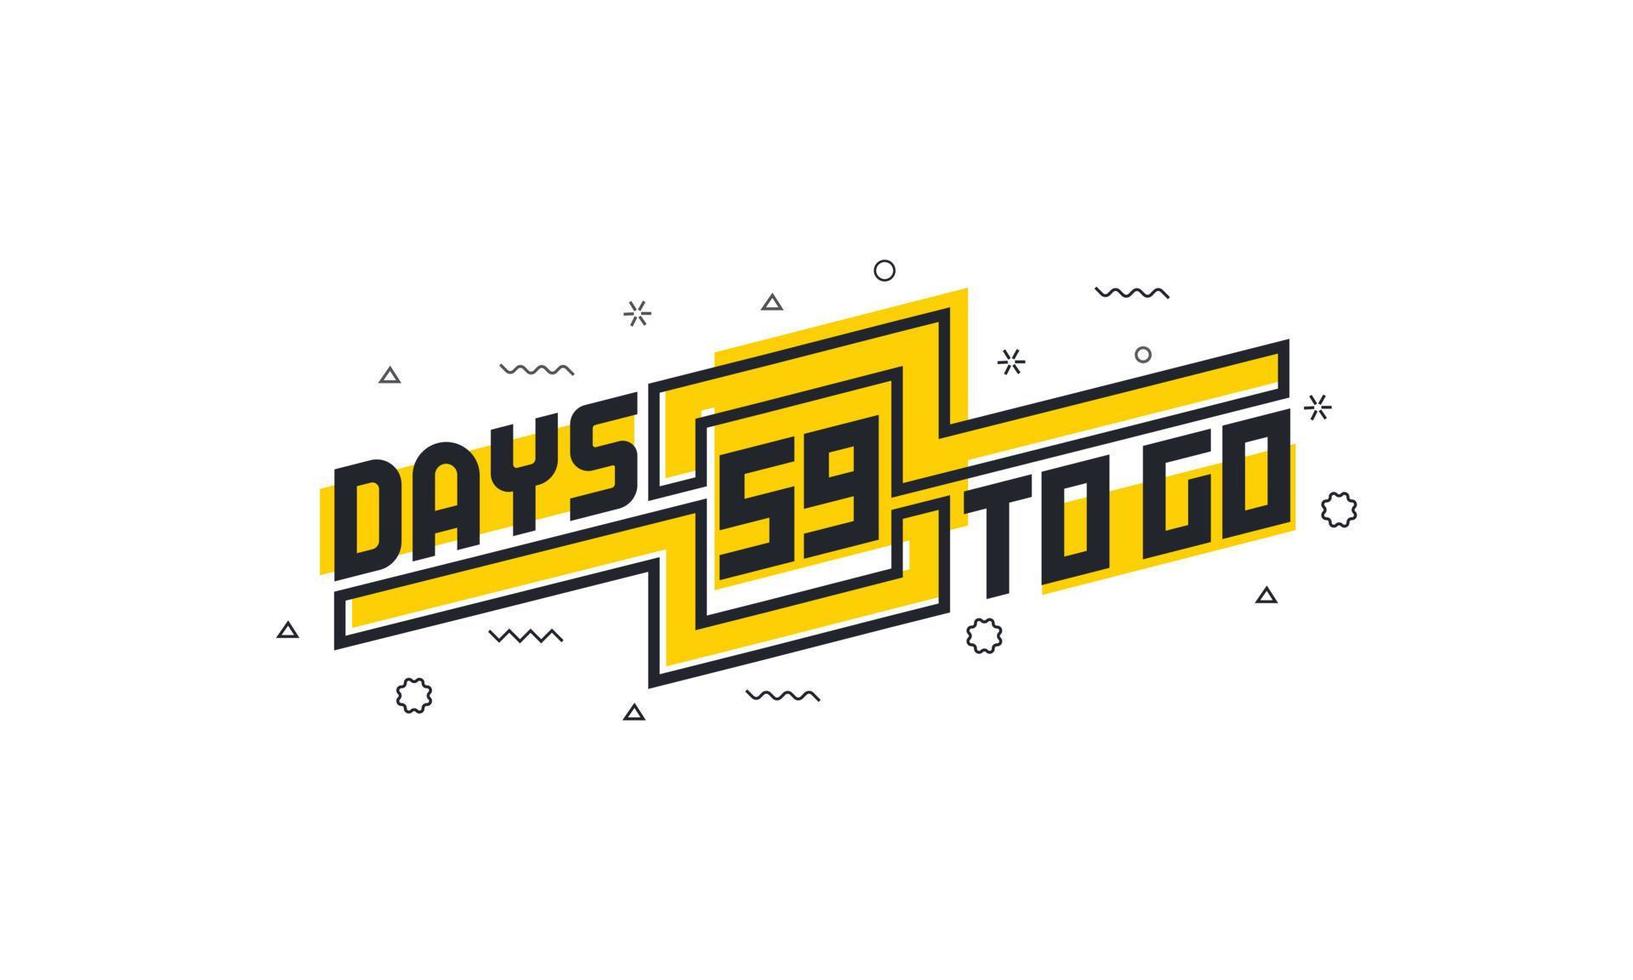 59 days to go countdown sign for sale or promotion. vector